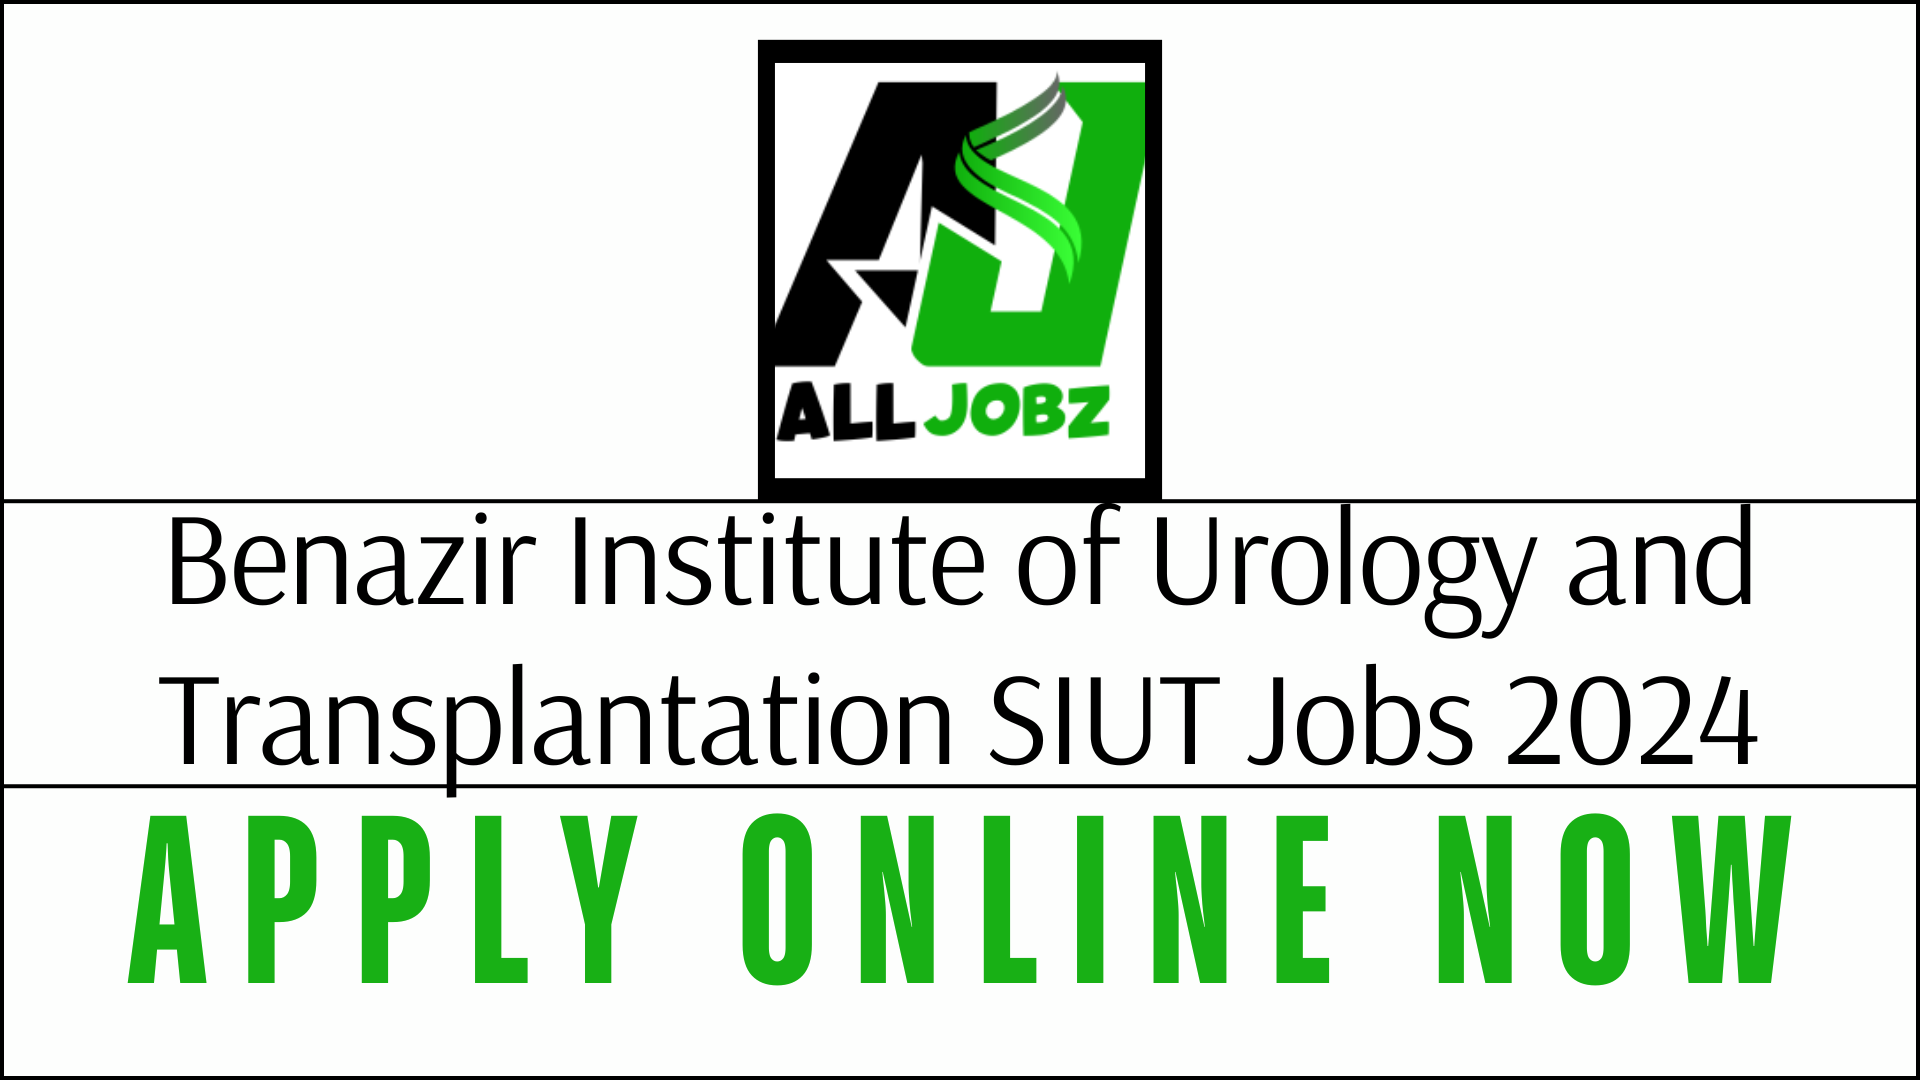 Benazir Institute Of Urology And Transplantation Siut Jobs 2024 For Ct Scan Technician, Security Guard, Security Supervisor, Cctv Operator, Senior Lecturer, Assistant Professor, Associate Professor, General Physician, Consultant/Specialist Radiology, Administrator, Nutritionist, And Ac Technician, Benazir Institute Of Urology And Transplantation Siut Jobs 2024 Online Apply, Benazir Institute Of Urology And Transplantation Siut Jobs 2024 Last, Www.siut.org Jobs, Siut Admission 2024, Benazir Institute Of Urology And Transplantation Siut Jobs 2024 Apply, Siut Nawabshah Jobs 2024, Siut Jobs 2024 Online Apply, Siut Hospital Karachi Location,